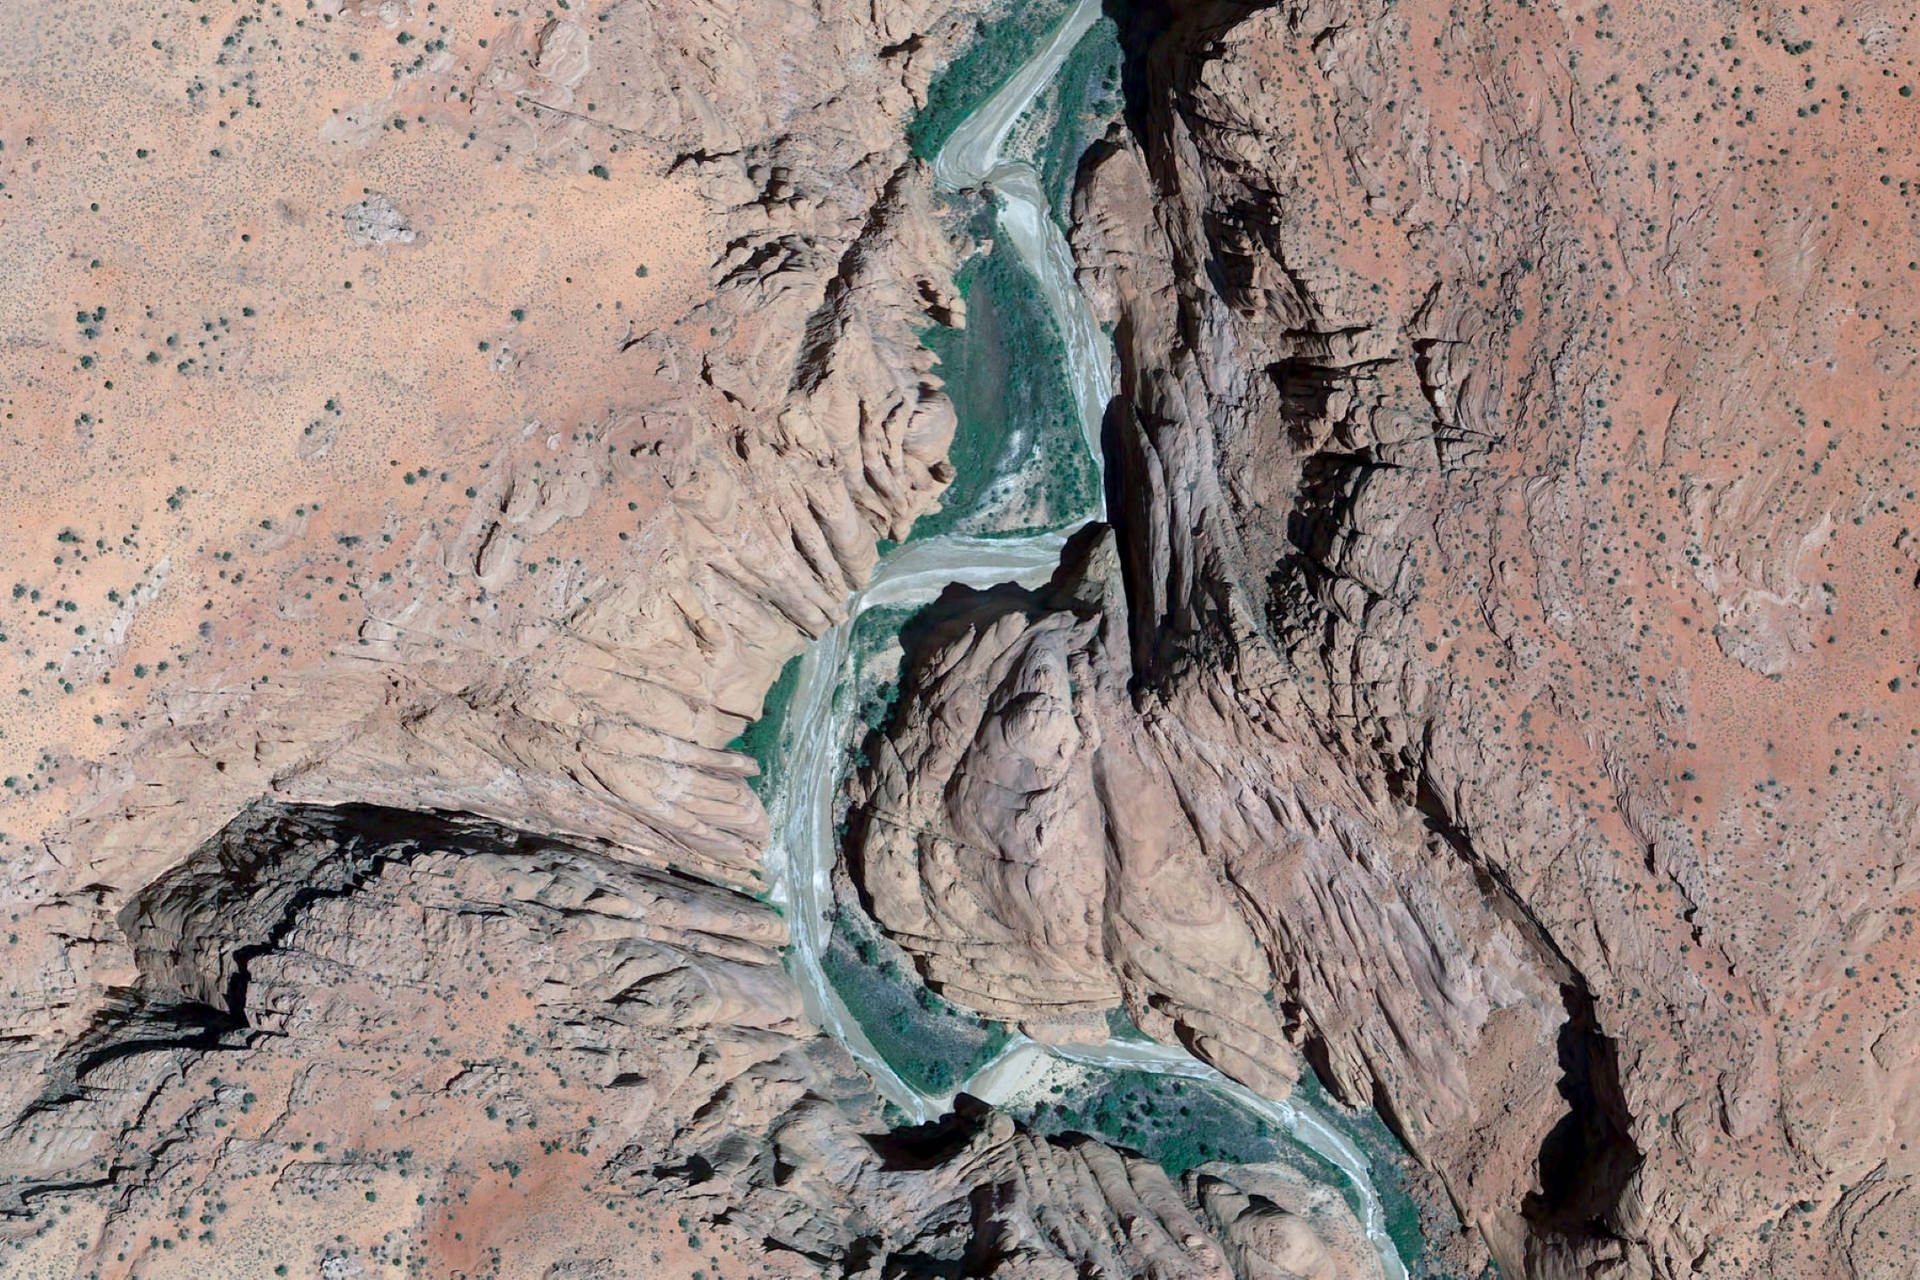 Majestic Marble Canyon Through Google Earth